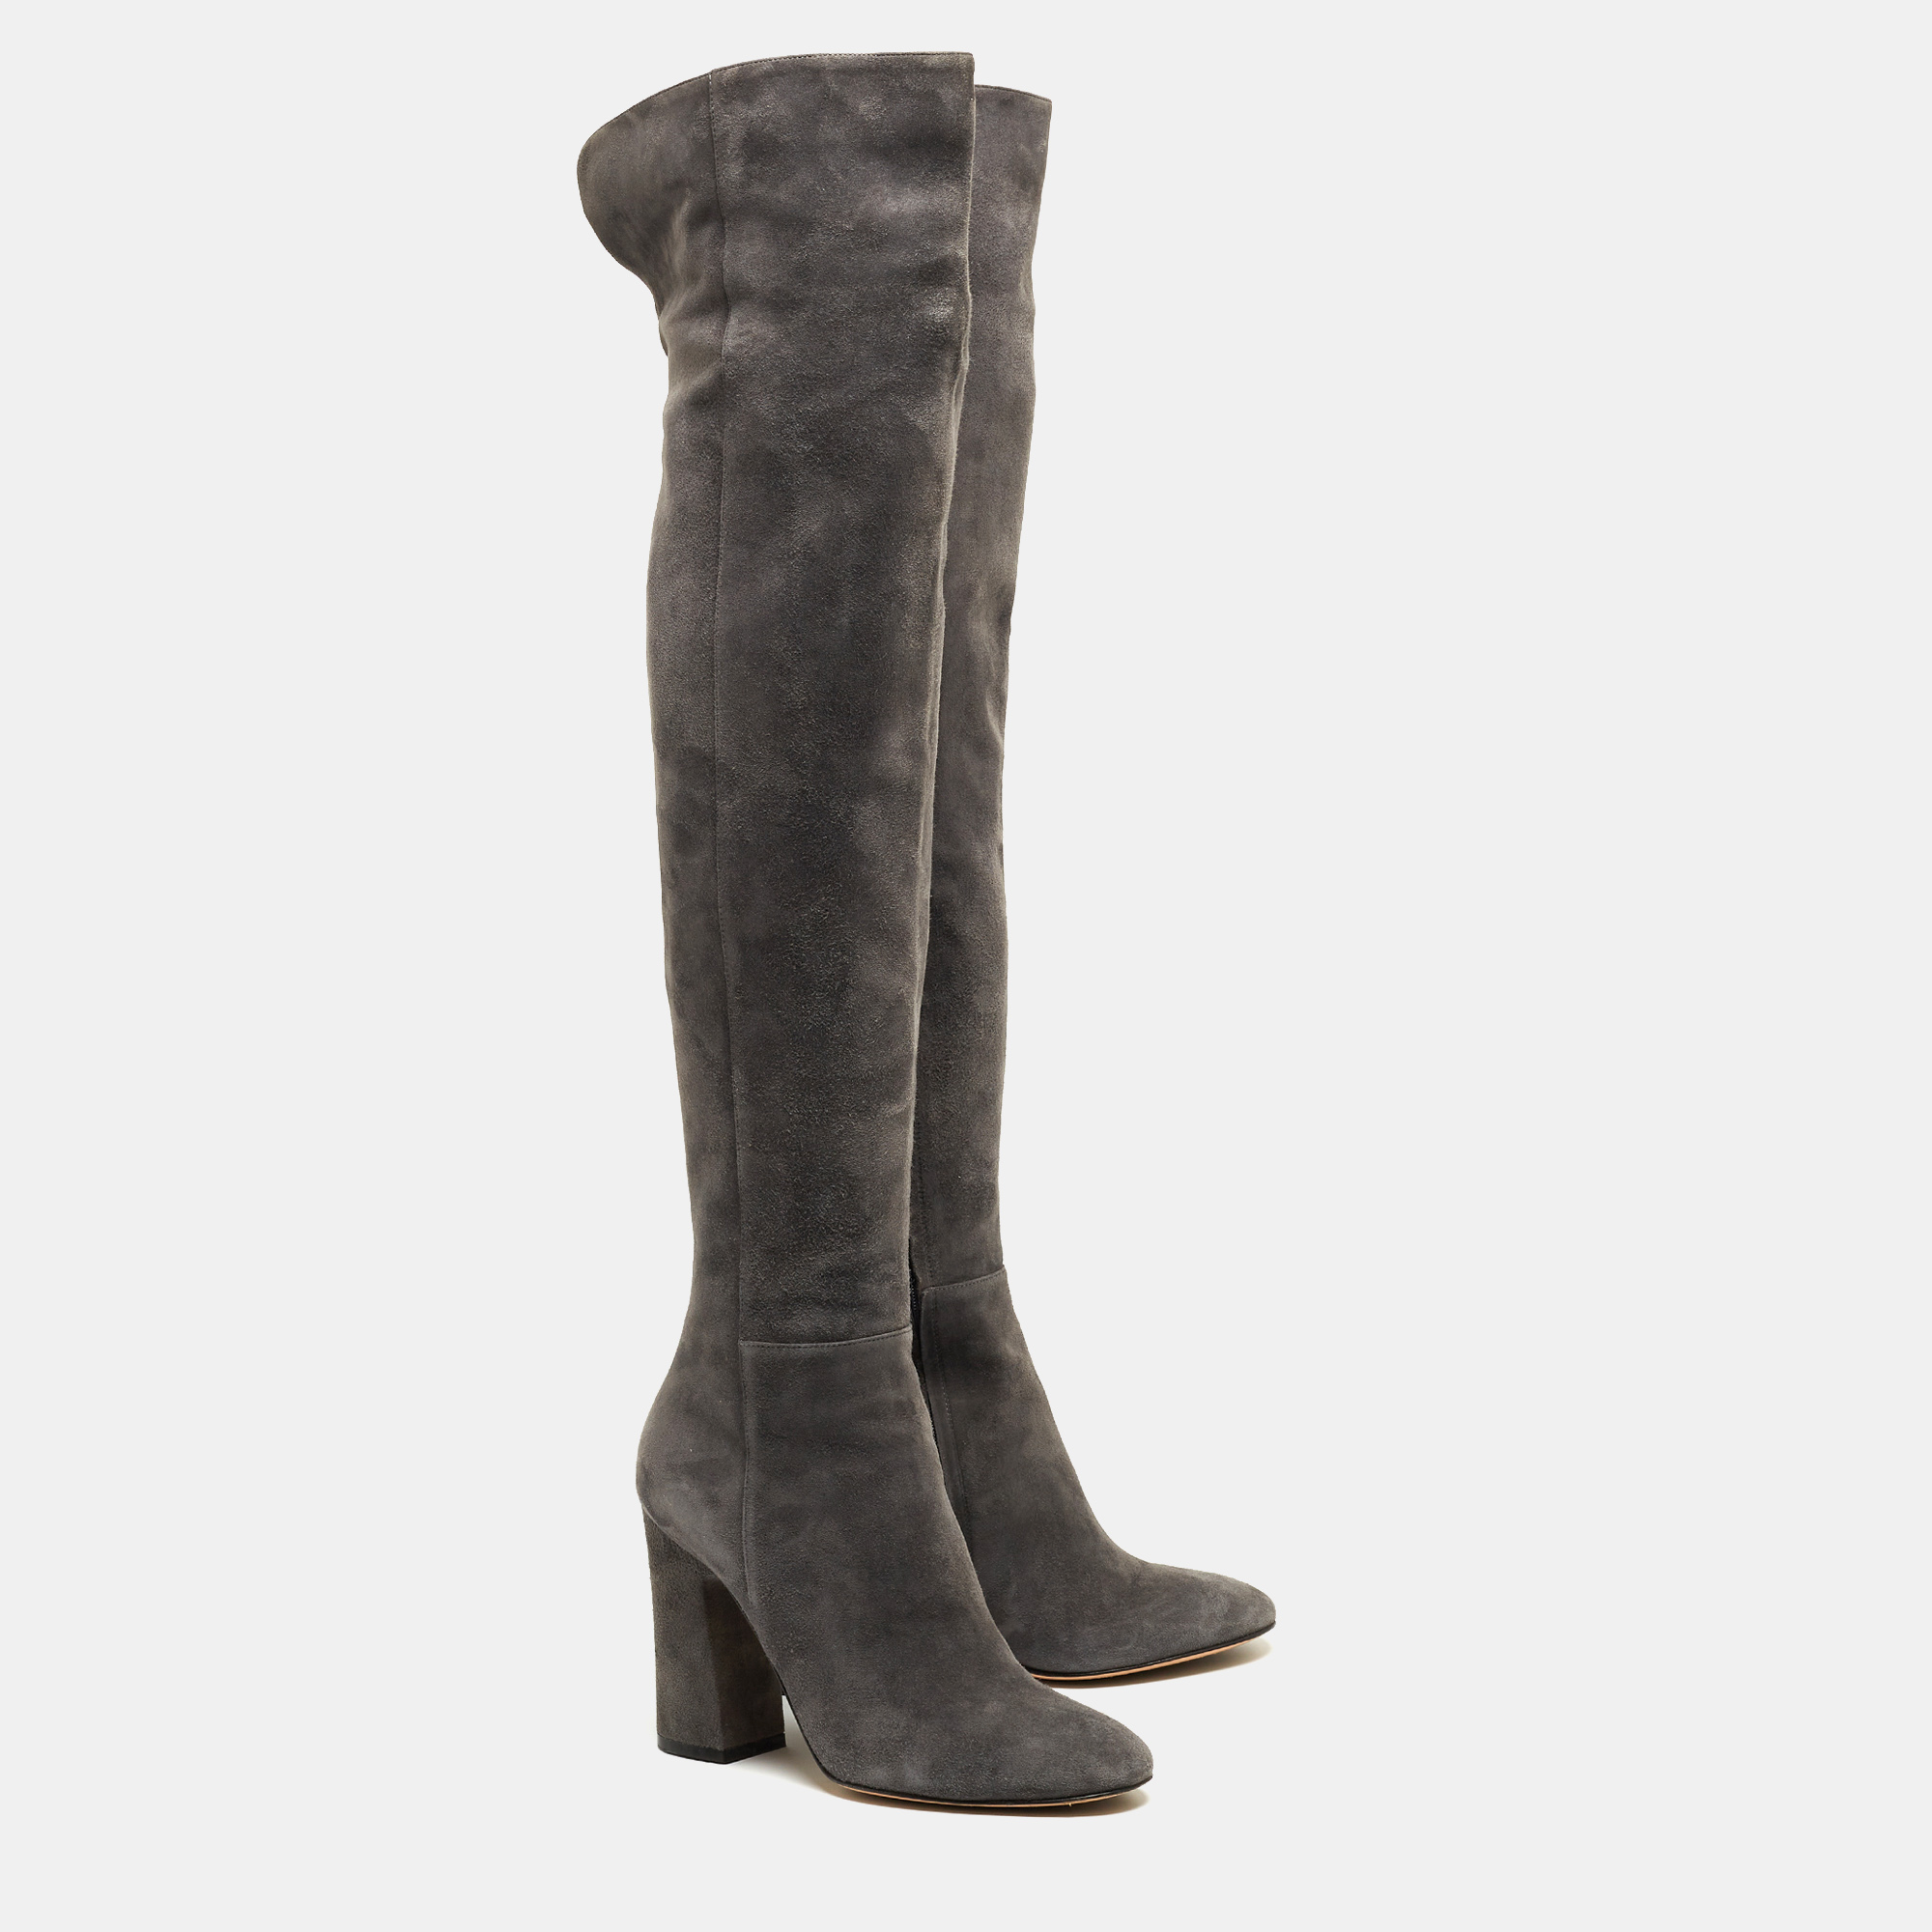 Gianvito Rossi Grey Suede Knee Boots Size 39